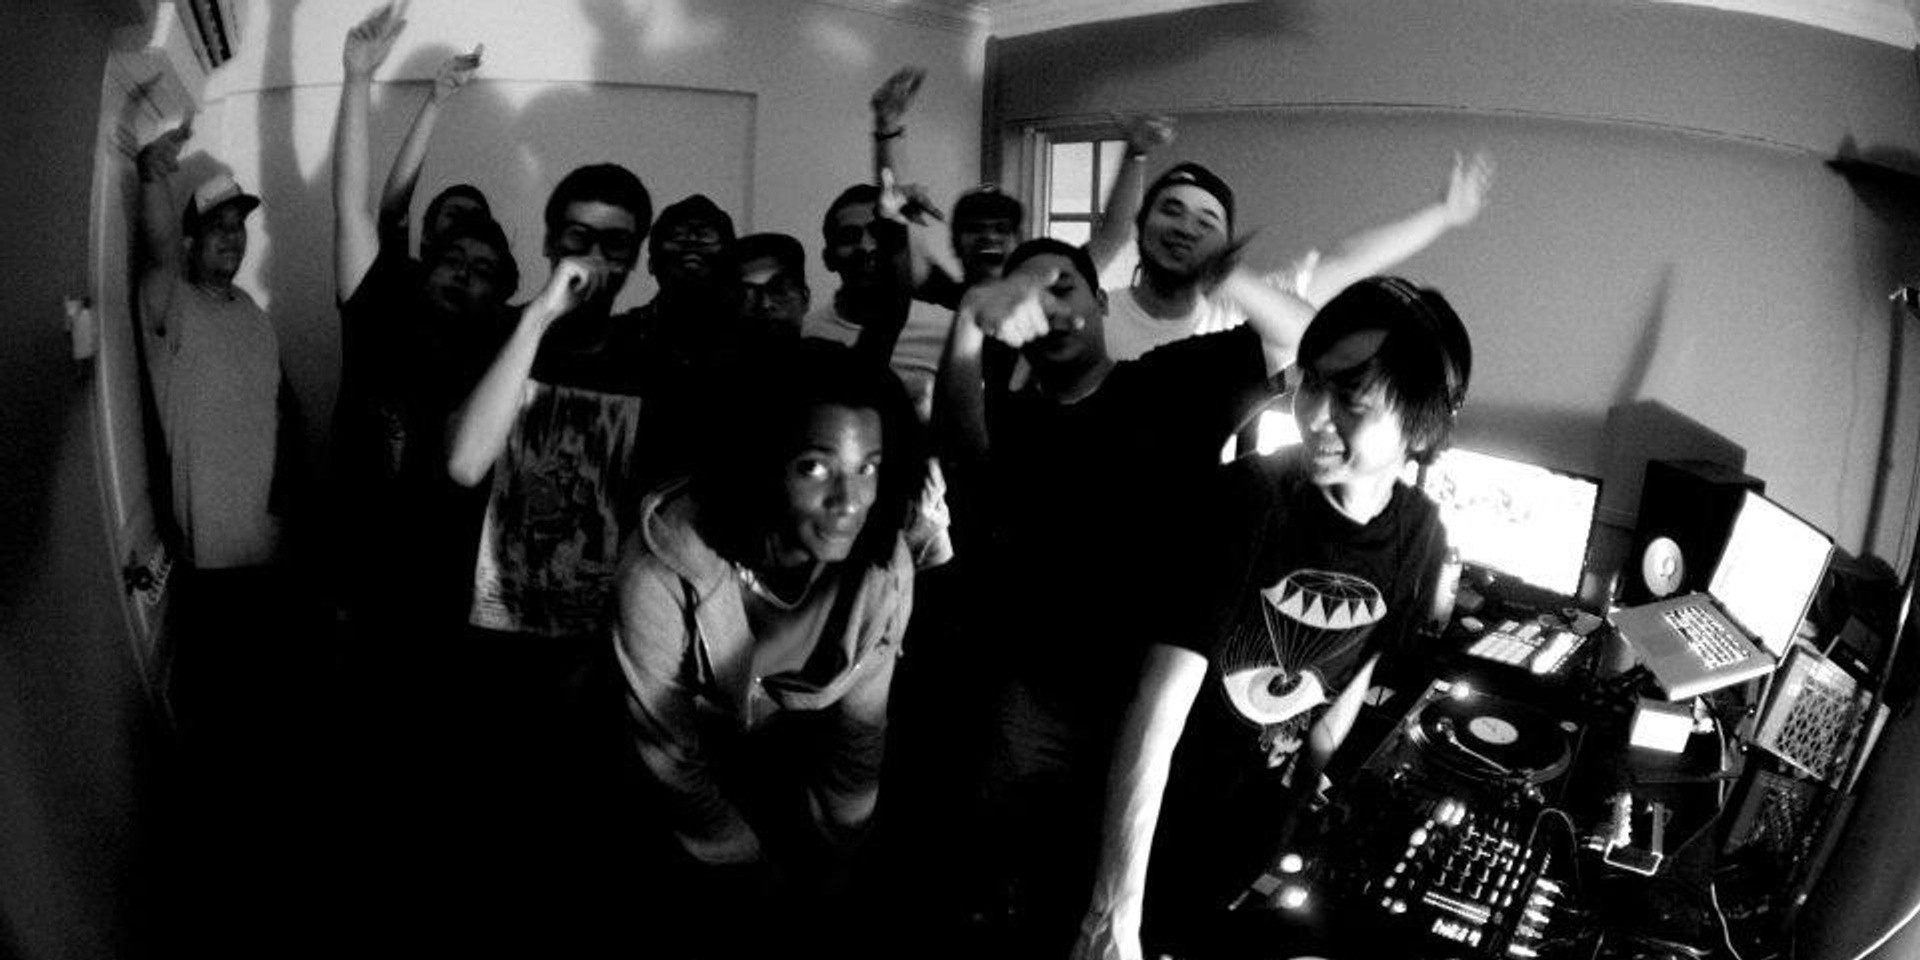 Singapore's Boiler Room: Panoptkn returns with a new series